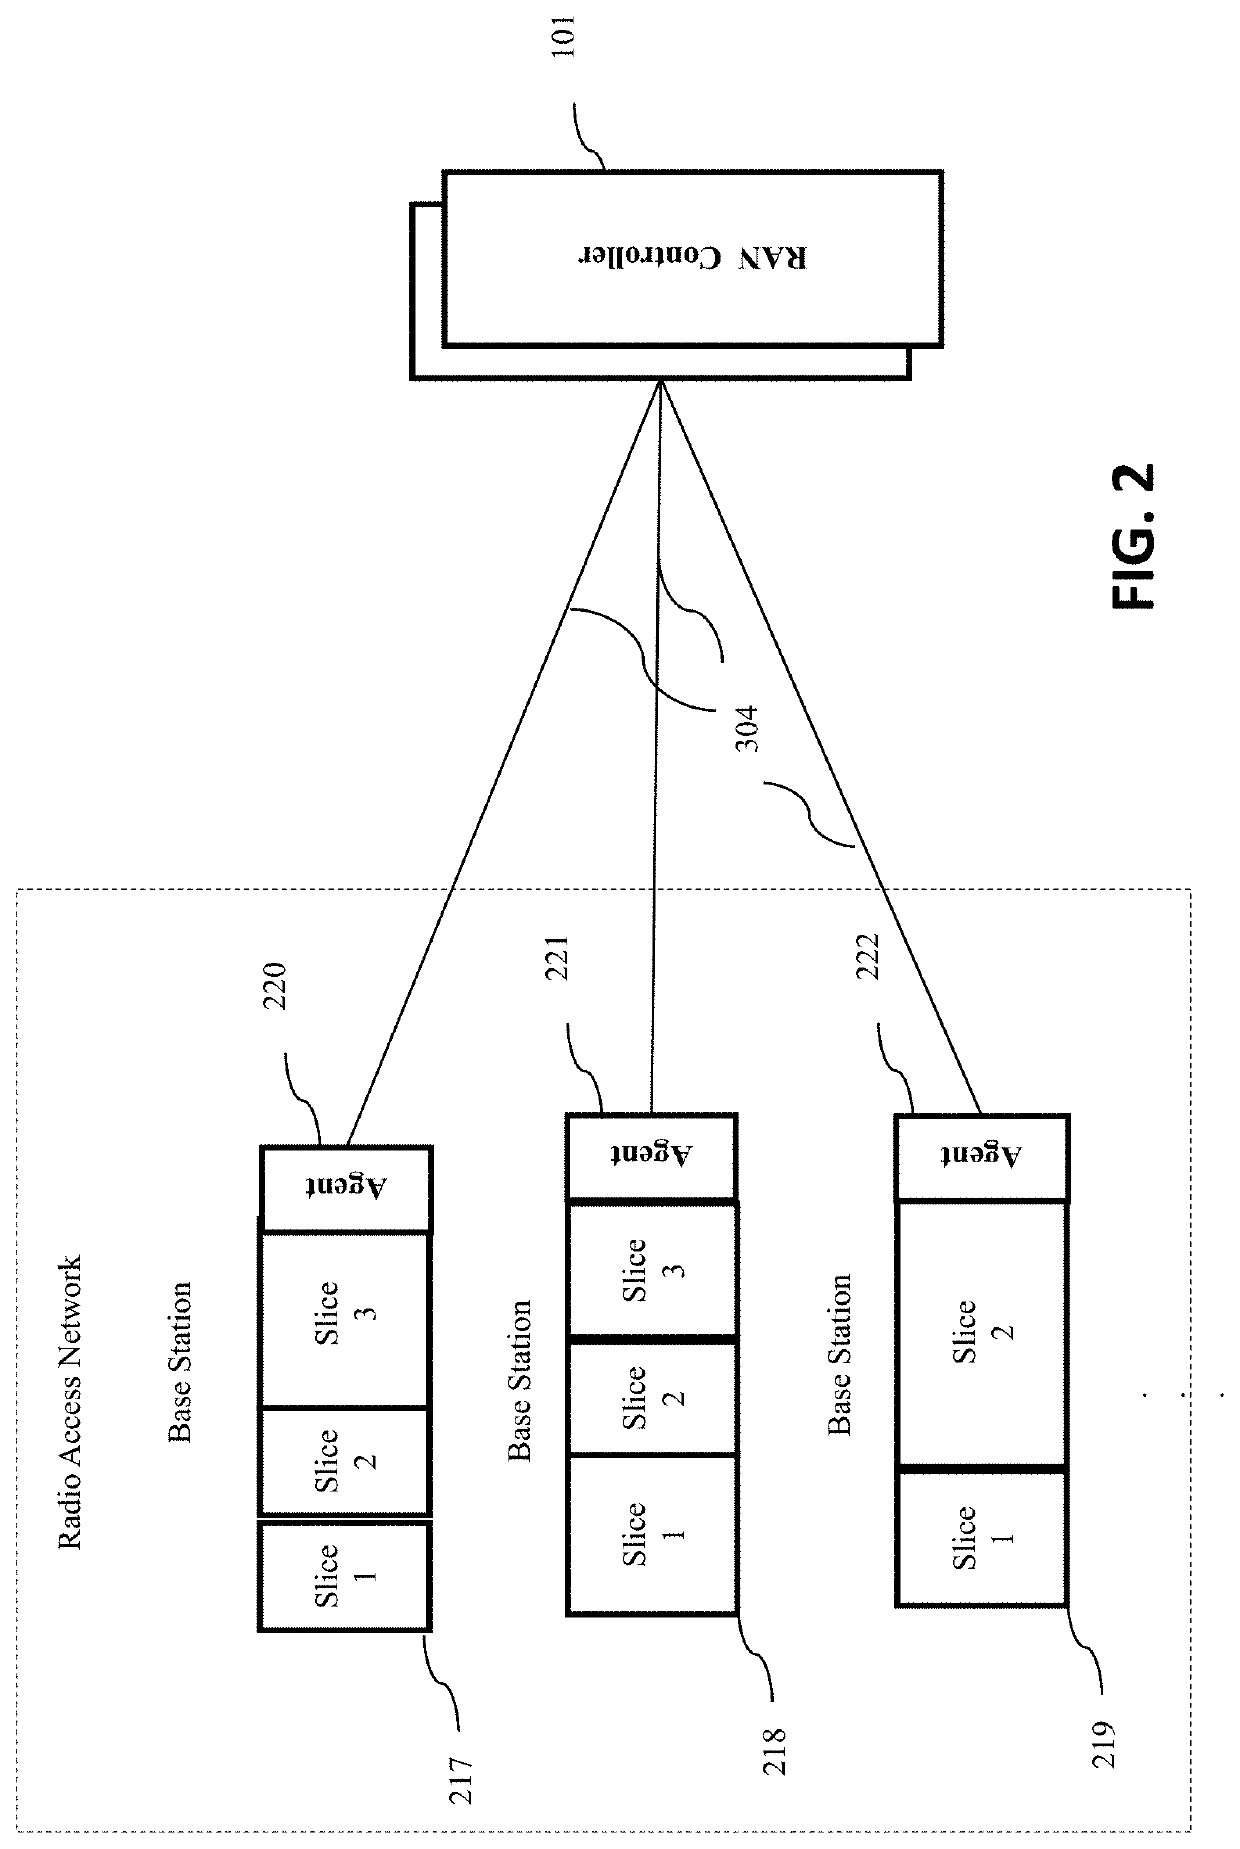 System and method for a distributed ledger for base station slicing using blockchain